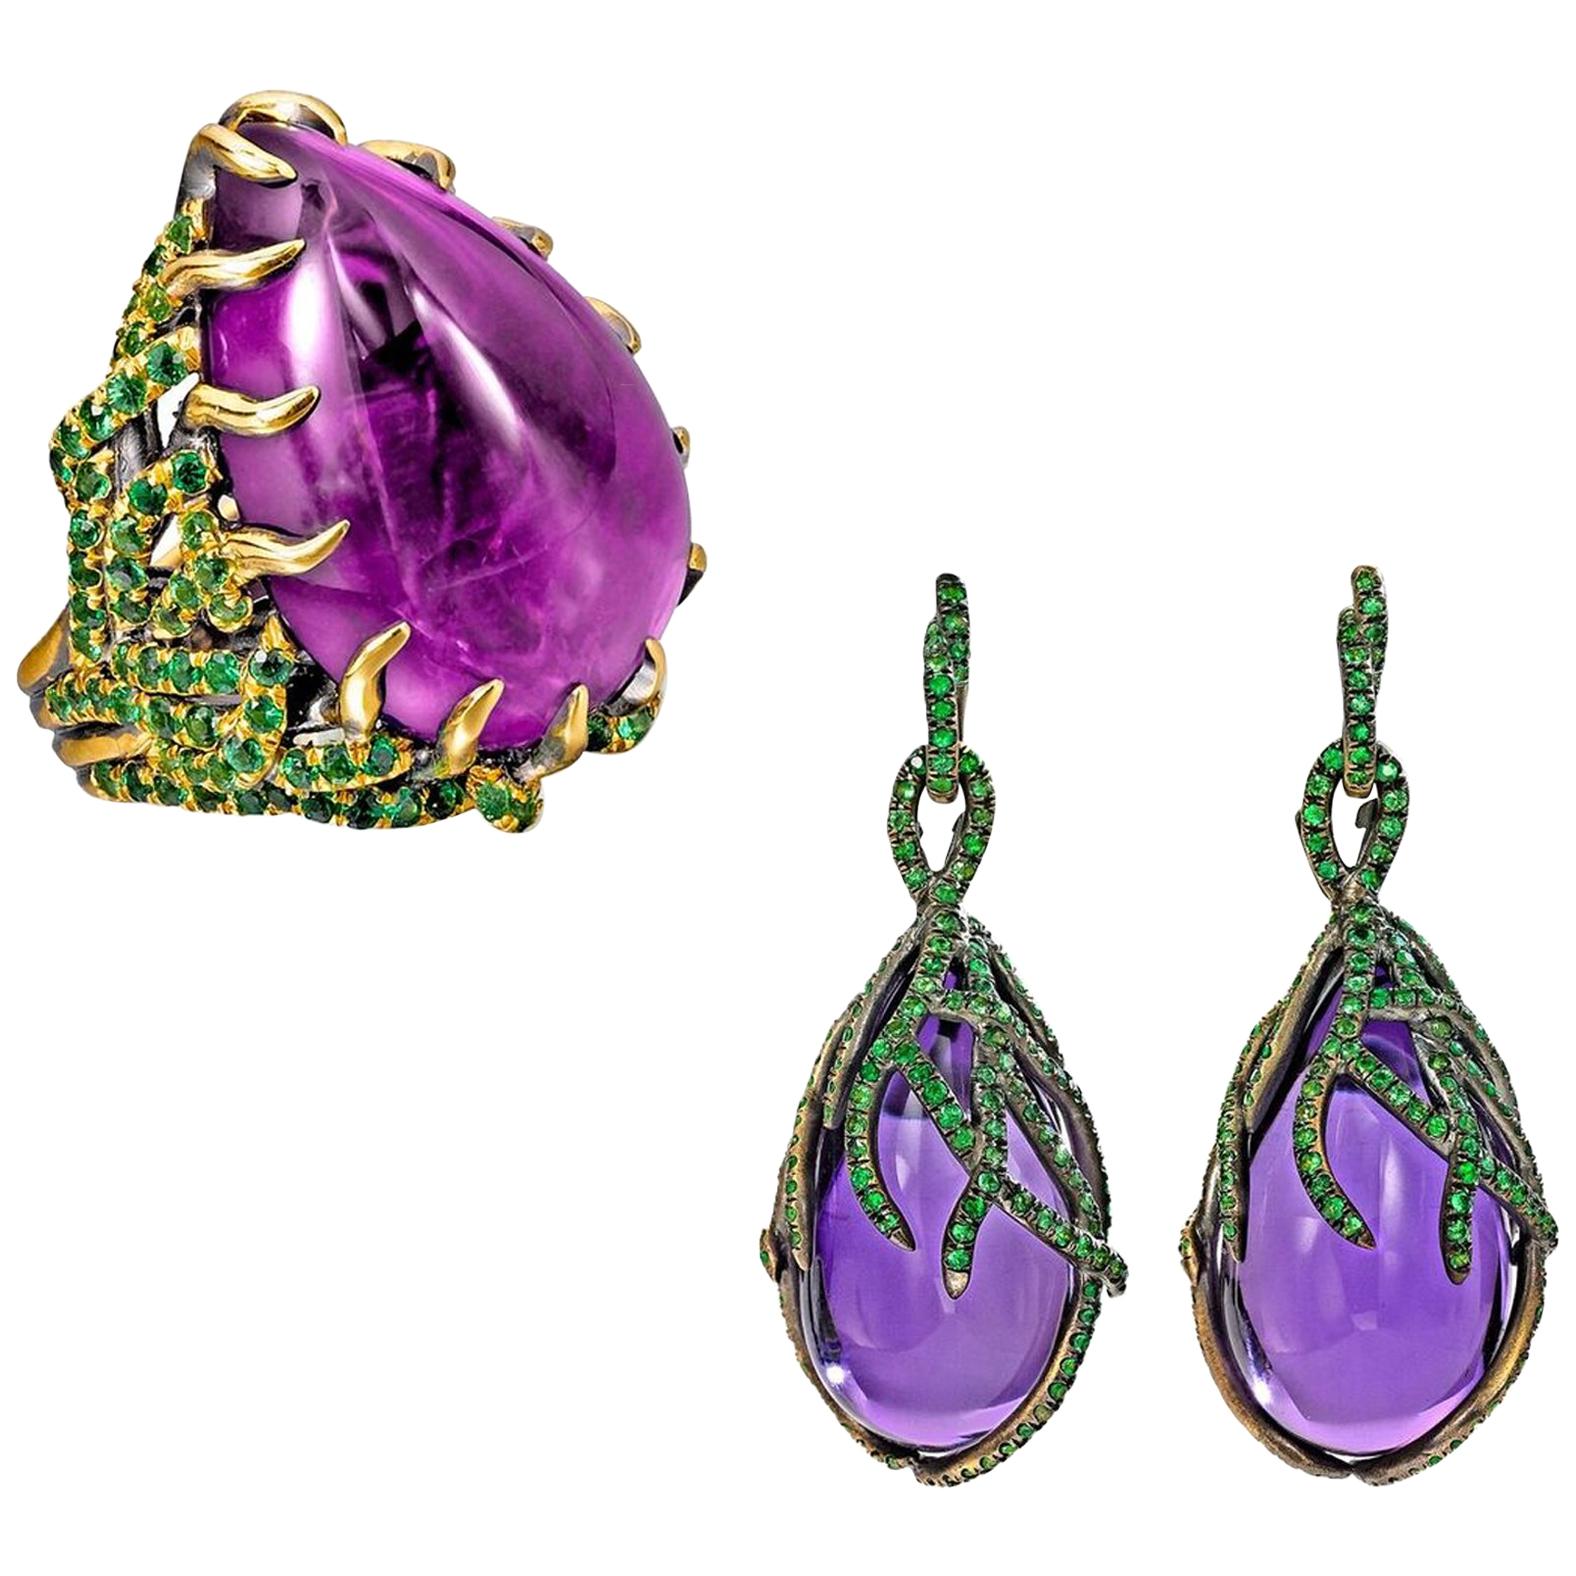 Wendy Brandes Cabochon Amethyst and Tsavorite Ring and Earrings Set